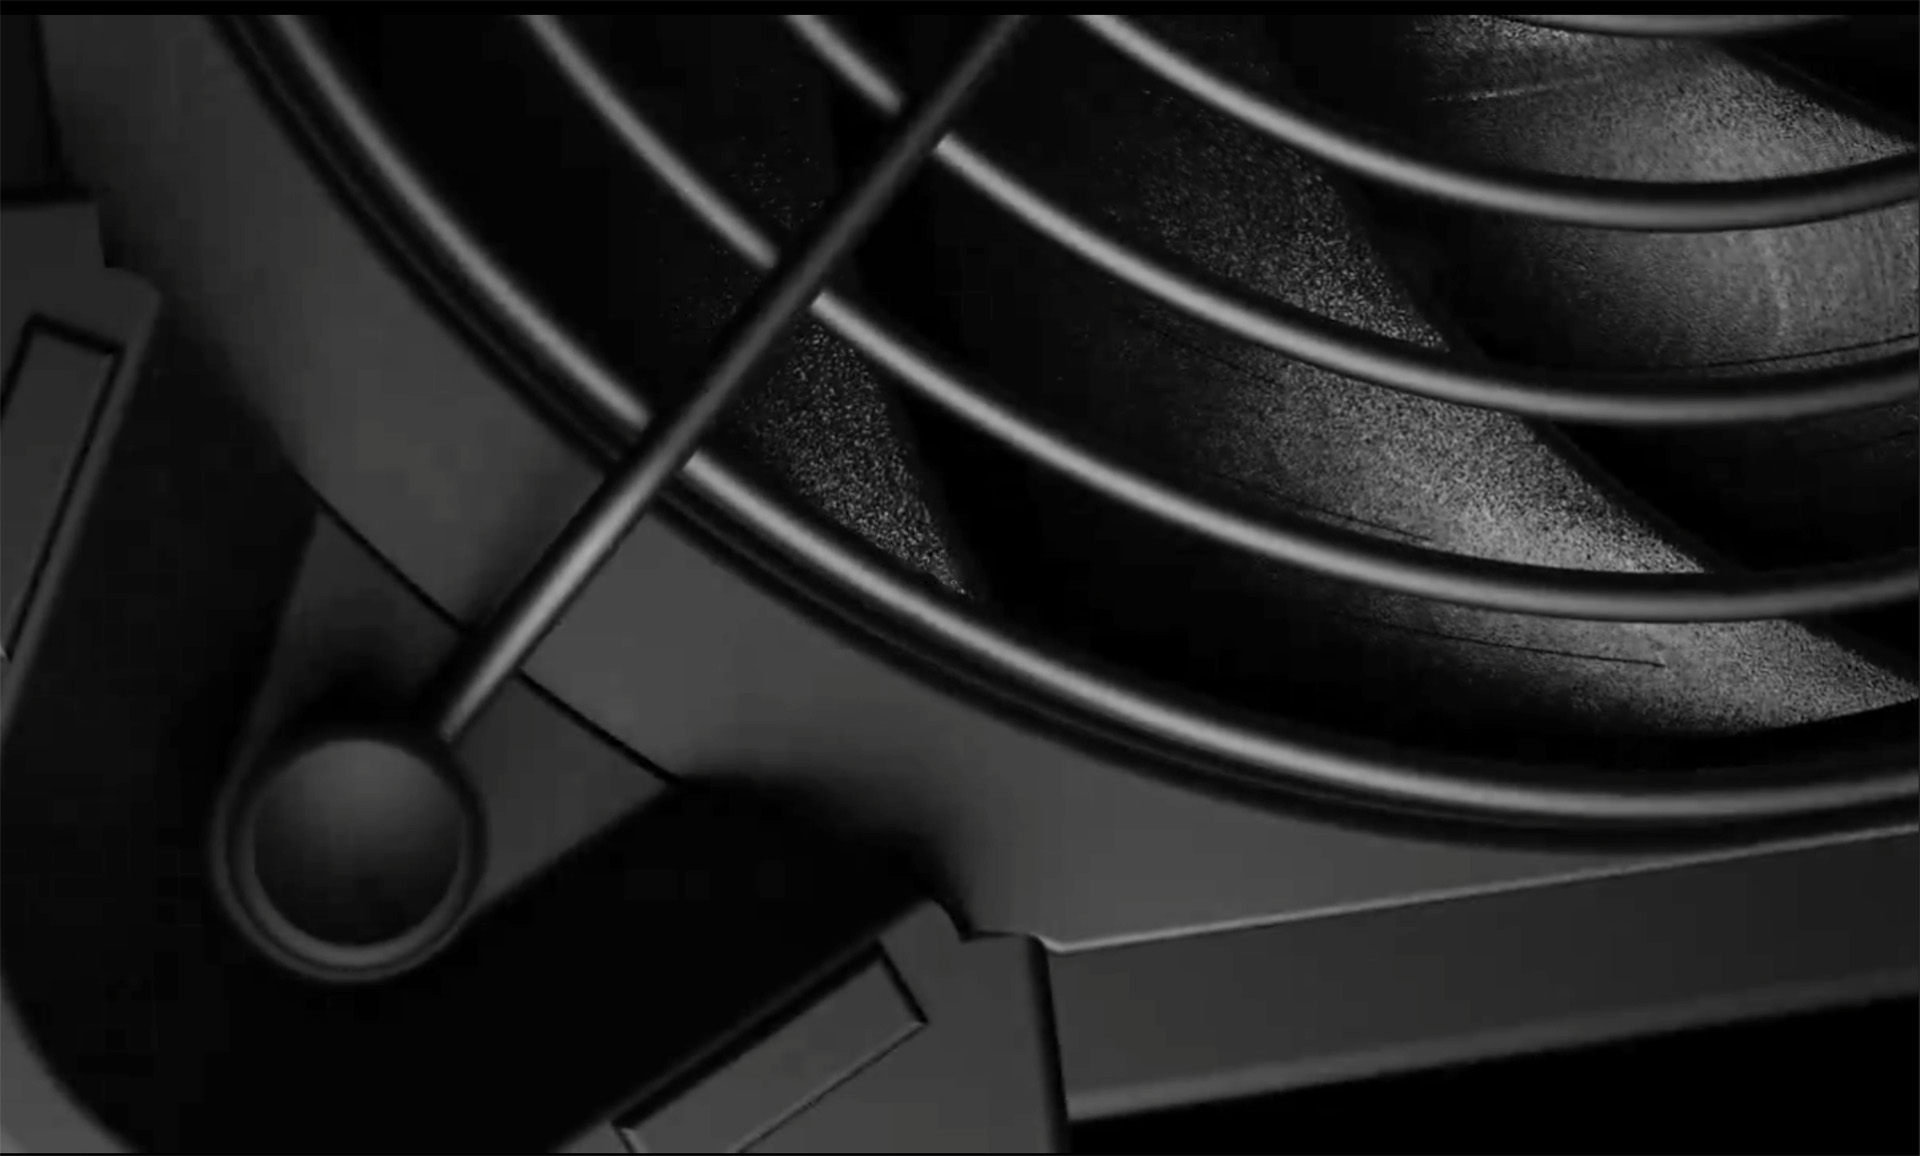  Noctua teases 'something new' that looks very much like the desk fan prototype it's had on show before 